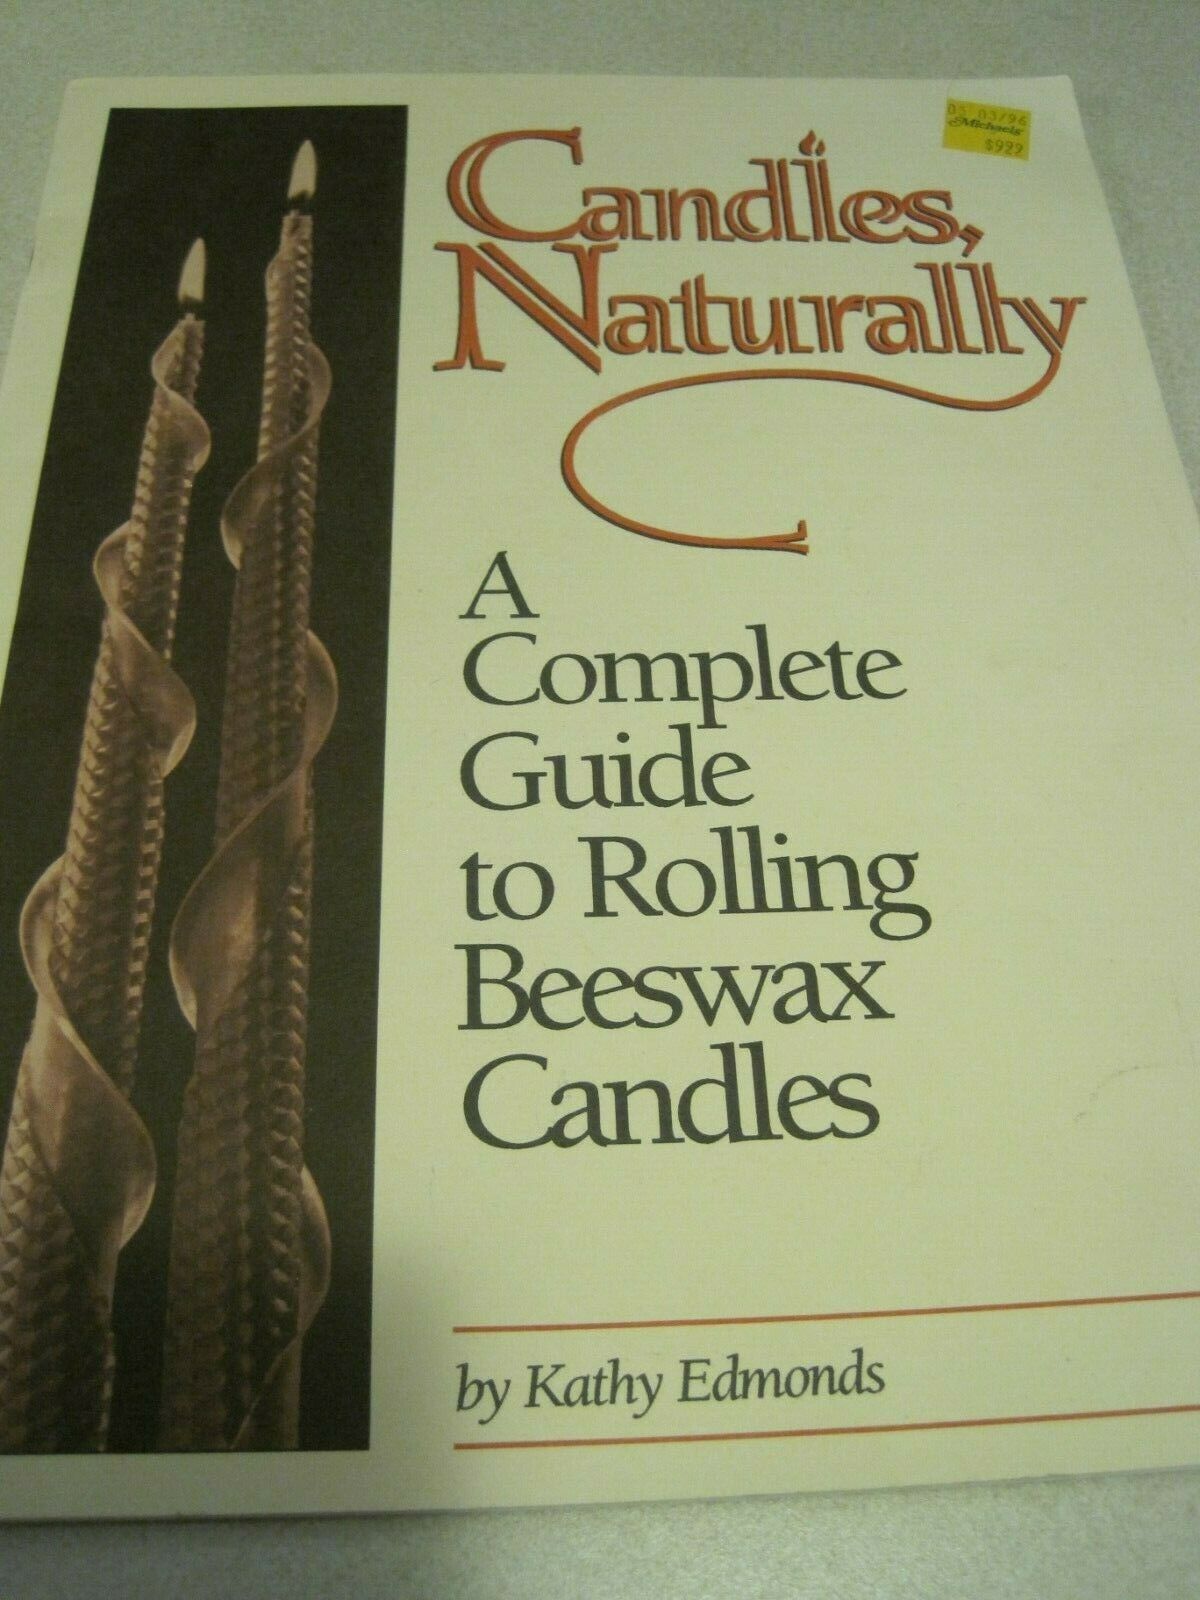 Book Candles Naturally Complete Guide To Rolling Beeswax Candles 22 Page Canada